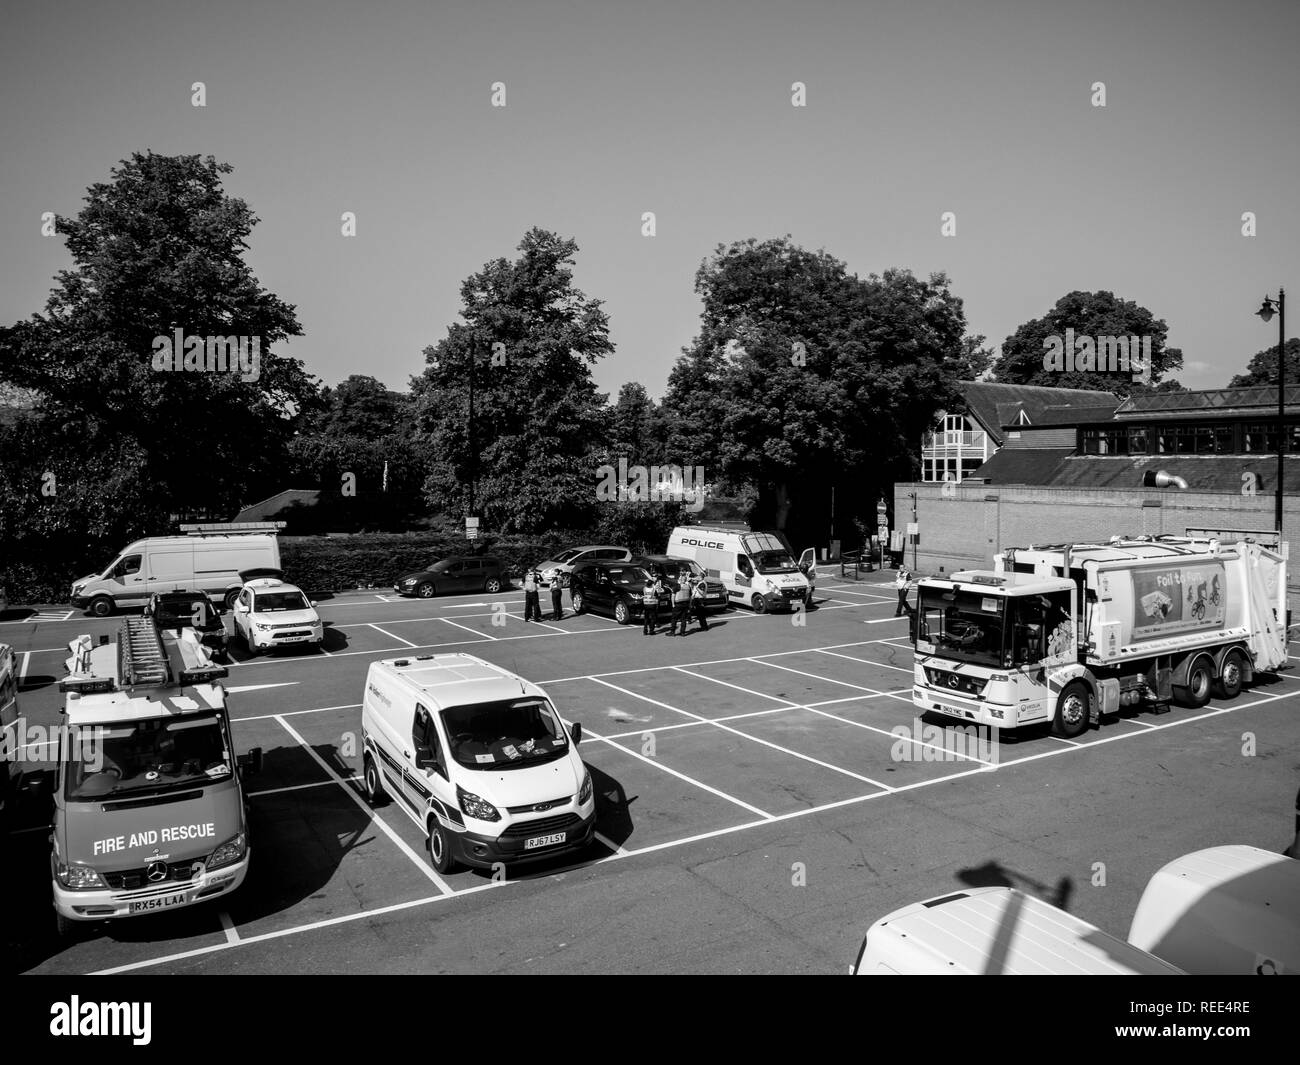 WINDSOR, UNITED KINGDOM - MAY 19, 2018: Security measures - ambulance, firefighter, ememergency trucks ready for  royal wedding marriage celebration of Prince Harry with Meghan Markle - aerial view Stock Photo